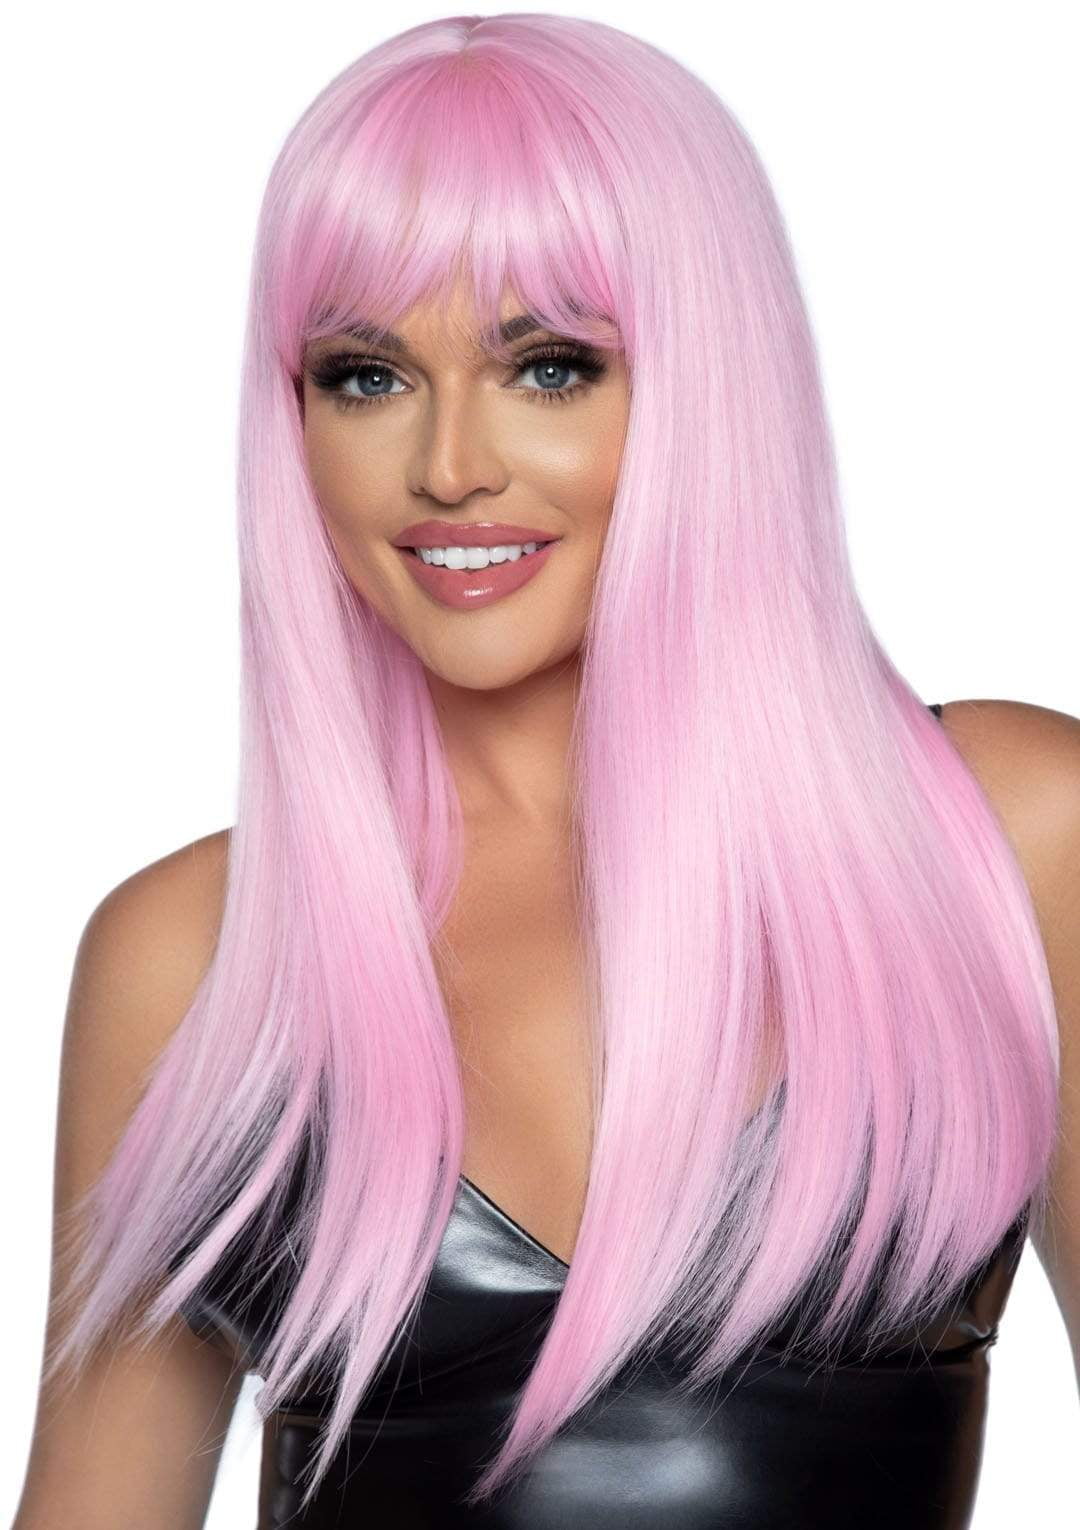 Black Adult Long Straight Fancy Dress Cosplay Synthetic Hair Wig With Fringe 